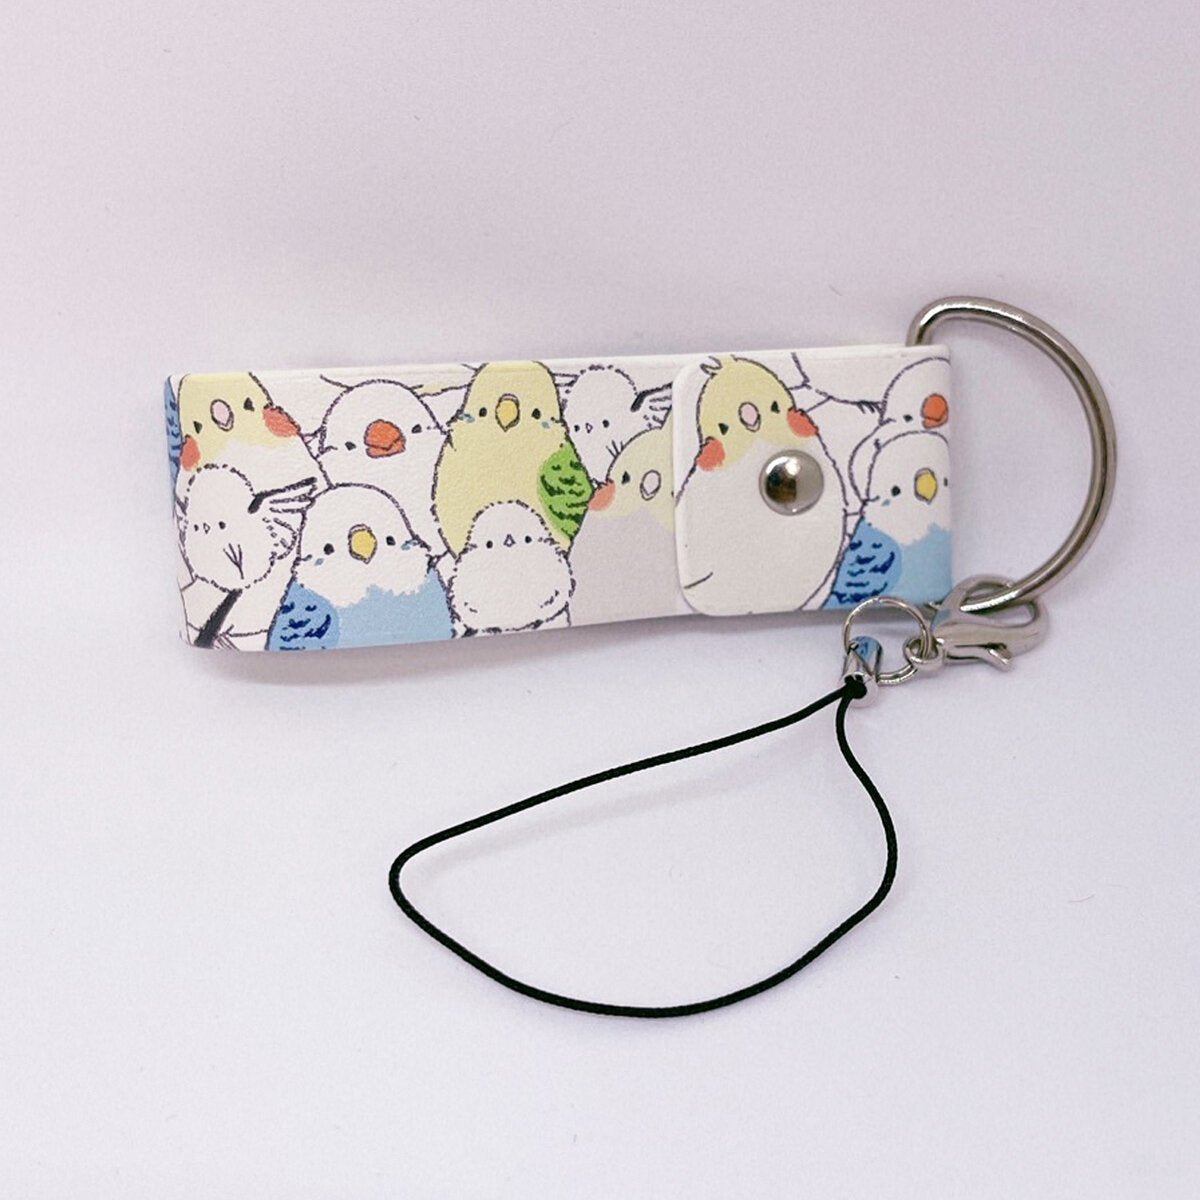 Long-tailed Tit Budgie Cockatiel Java Sparrow Leather Strap Key Holder